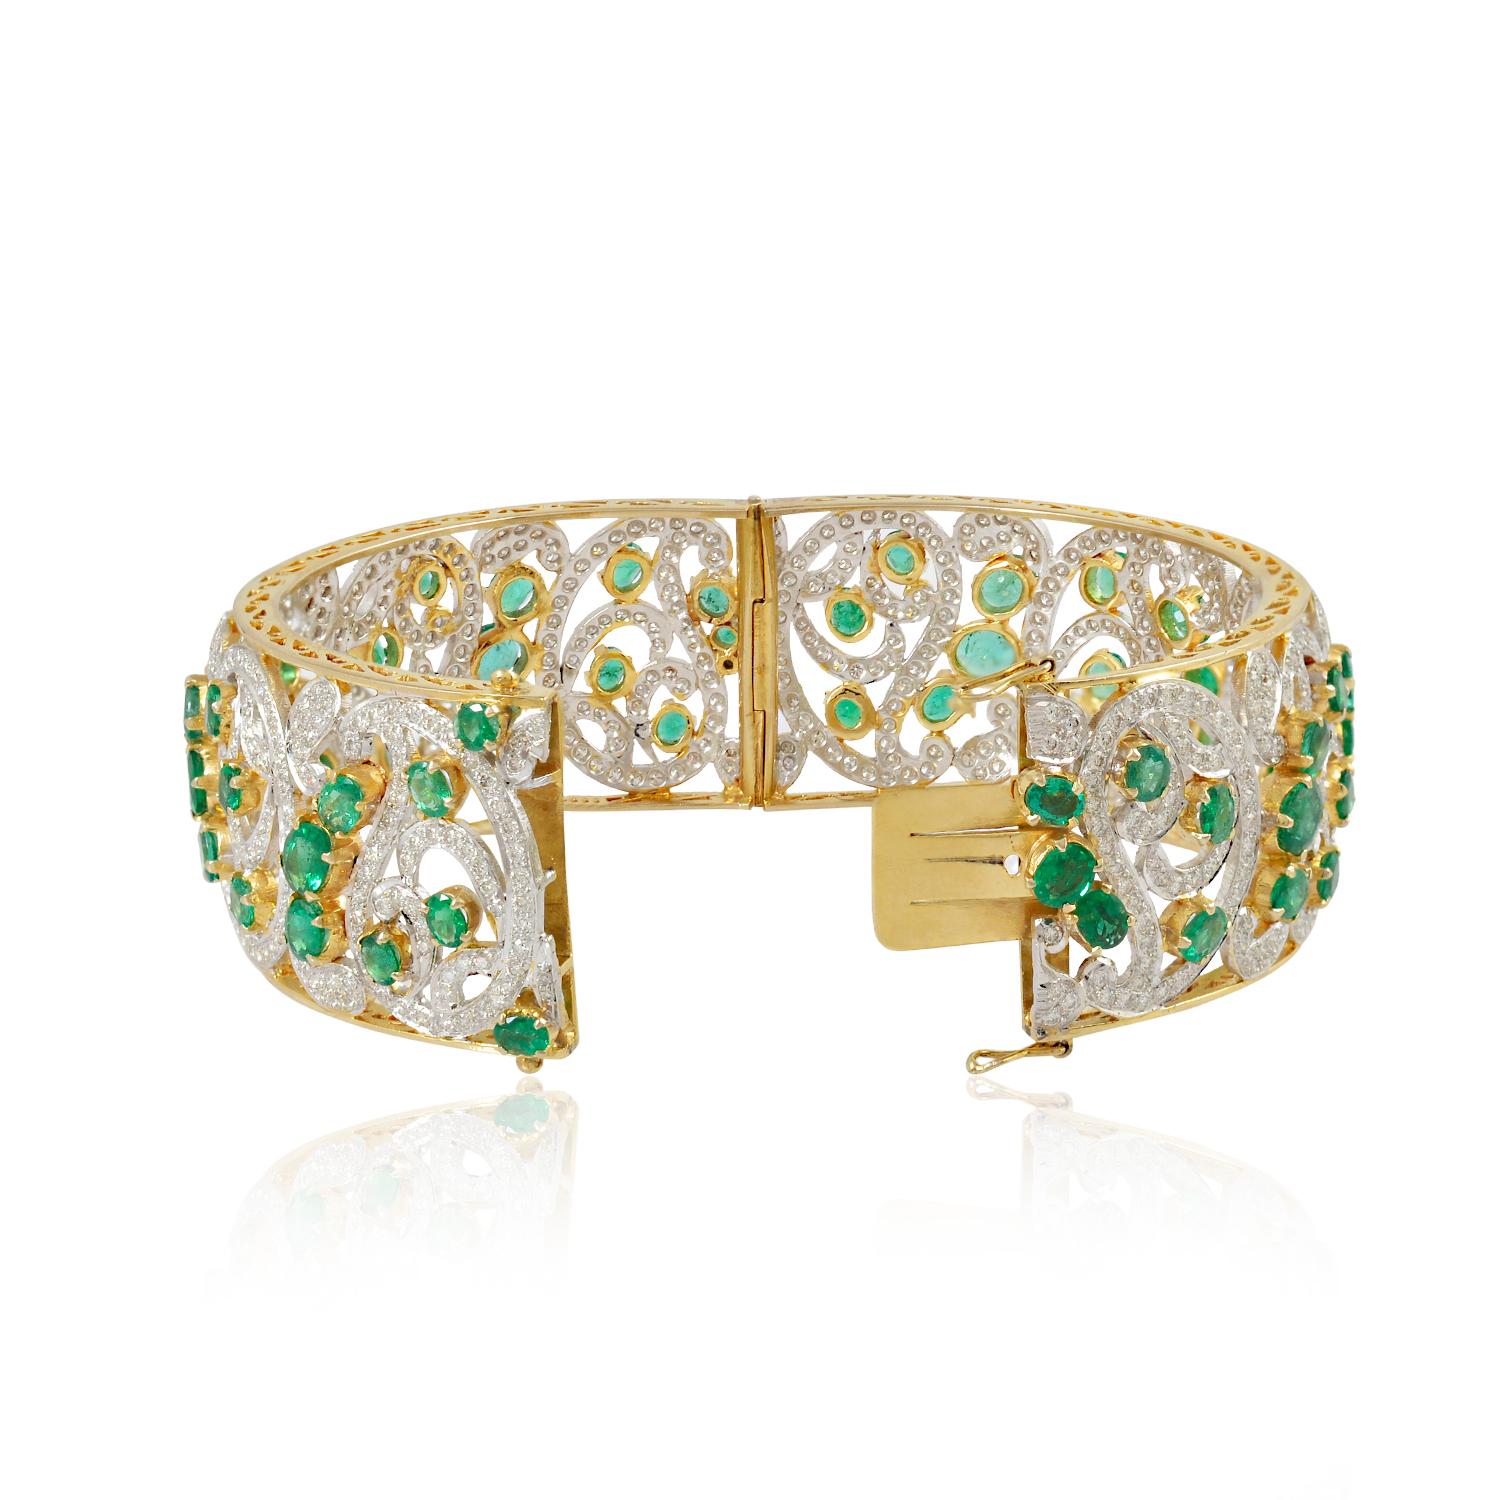 Item Code :- CN-16522
Gross Wt. :- 82.48 gm
18k Yellow Gold Wt. :- 76.46 gm
Diamond Wt. :- 14.1 Ct. ( AVERAGE DIAMOND CLARITY SI1-SI2 & COLOR H-I )
Emerald Wt. :- 16 Ct.
Bangle Size :- 60.45 x 60.45 mm approx.
✦ Sizing
.....................
We can